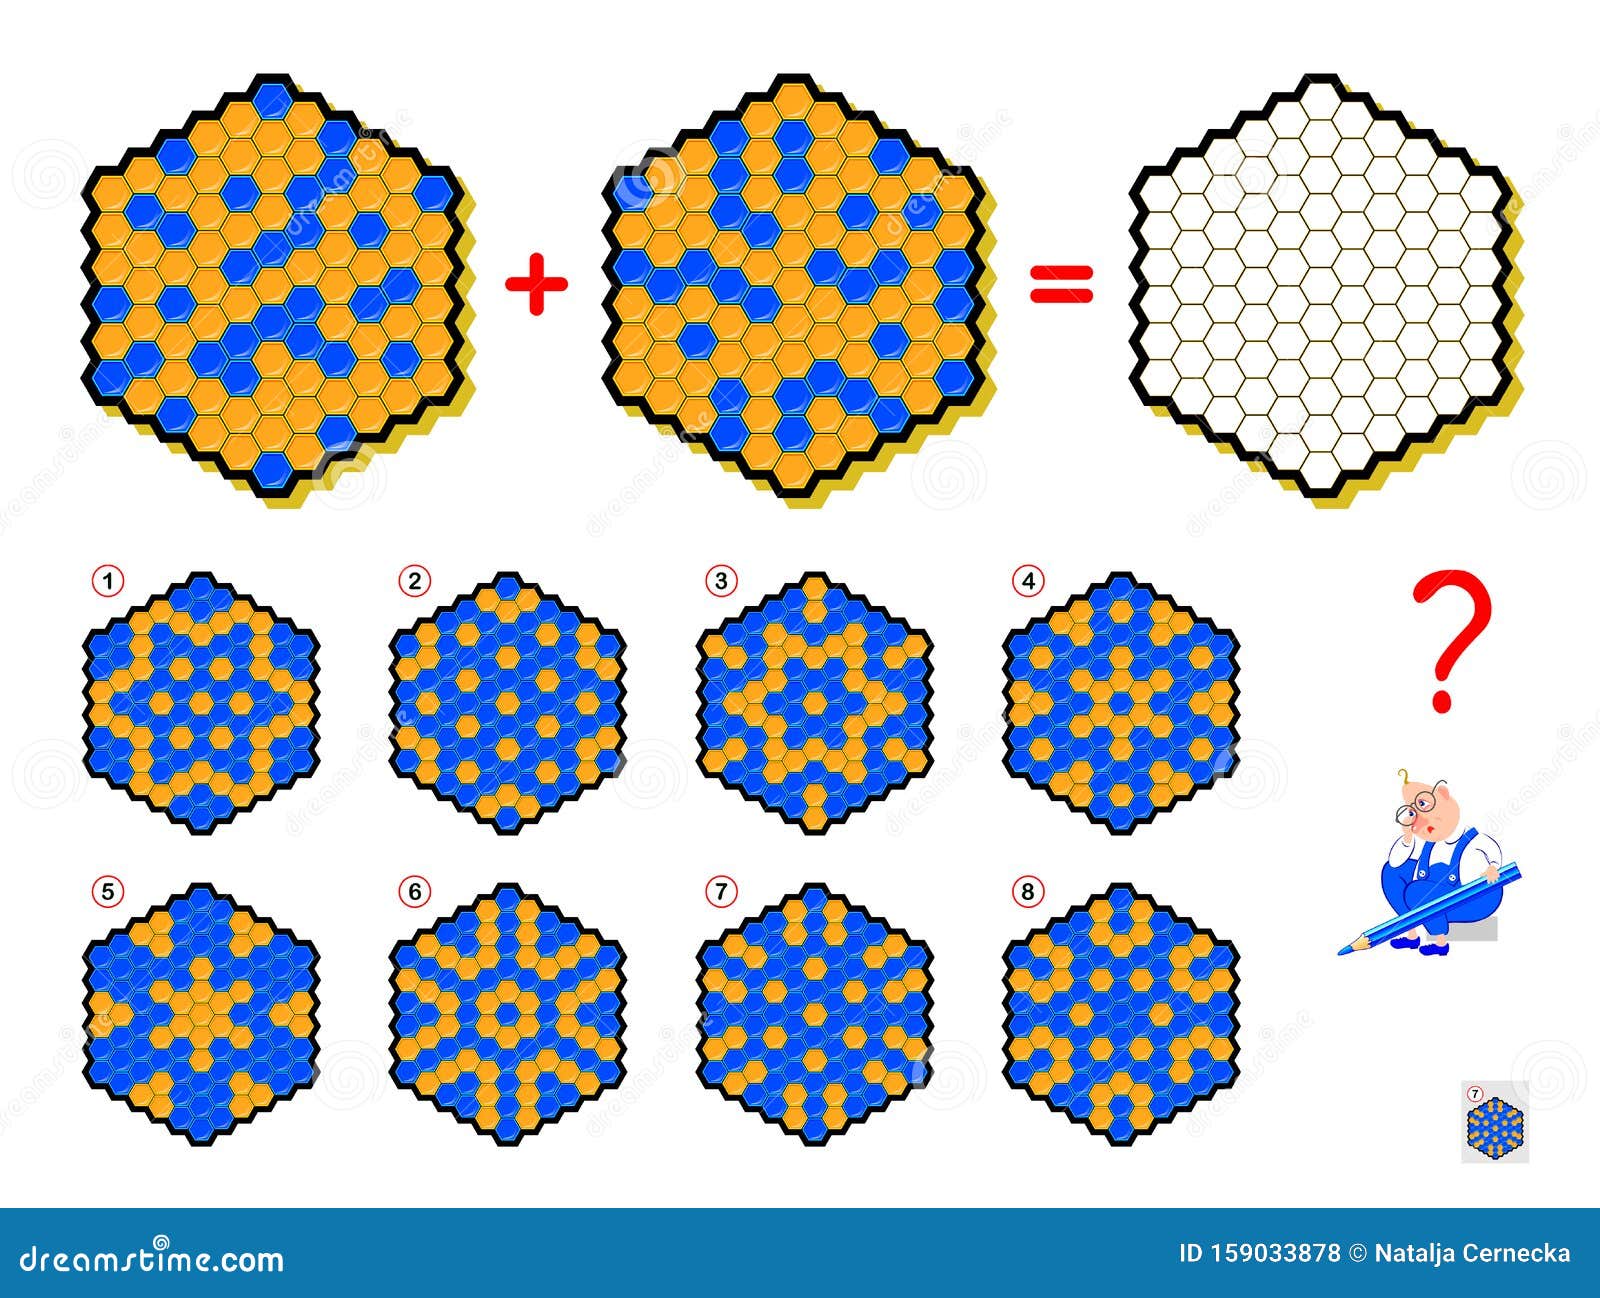 mathematical logic puzzle game for children and adults. what sign should be in empty hexagon? draw him.